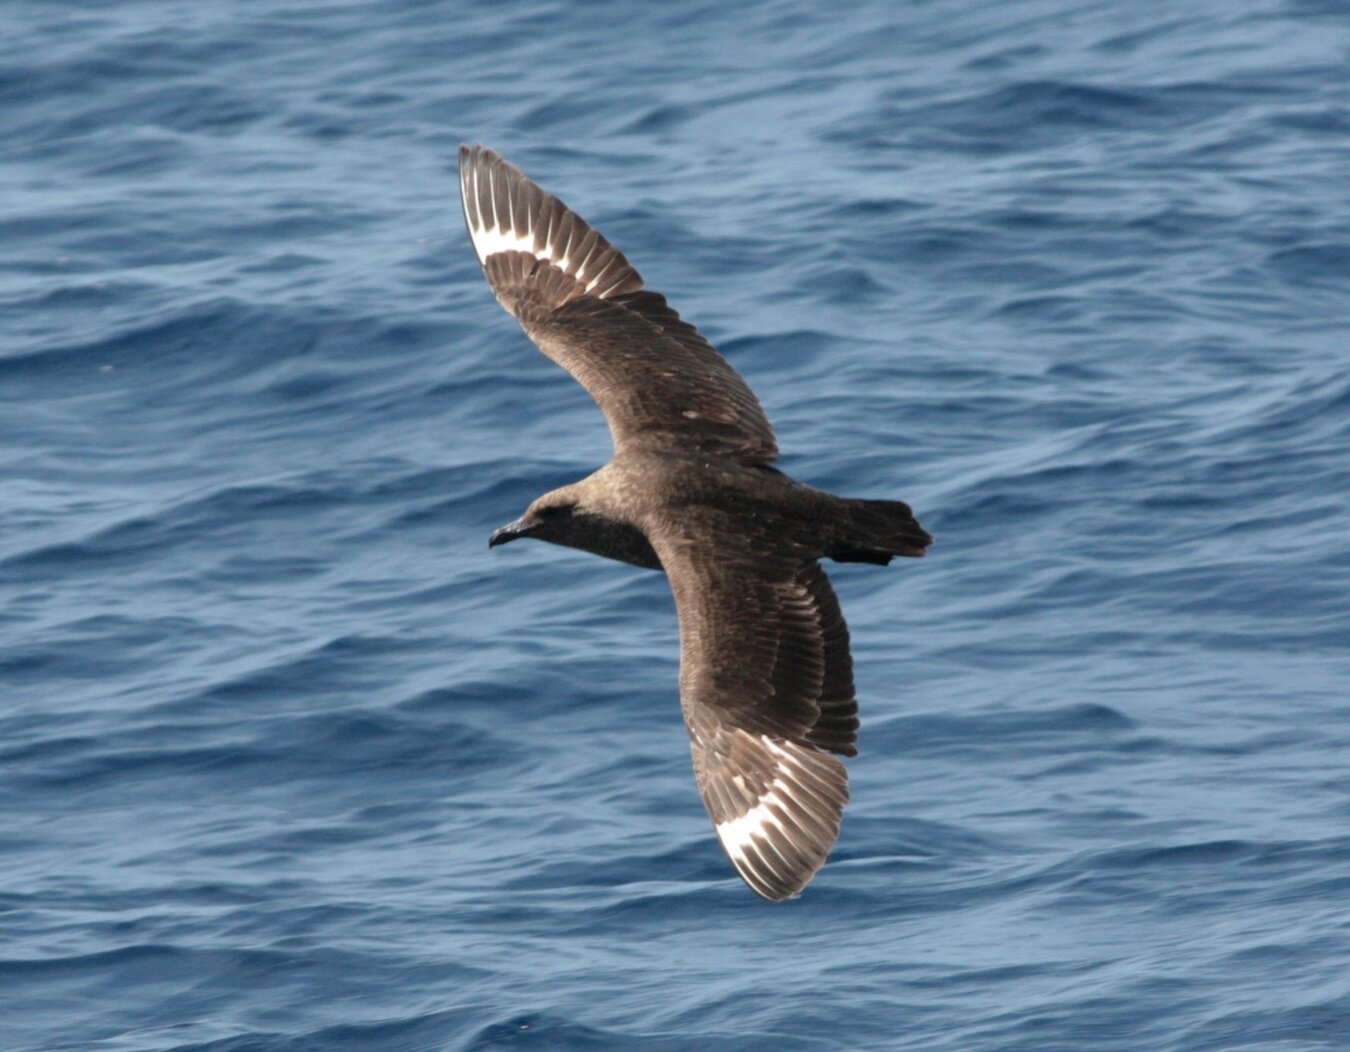 Tropical storms sometimes bring very unusual southern species such as the South Polar Skua to New York City waters. Photo: n88n88/CC BY 2.0